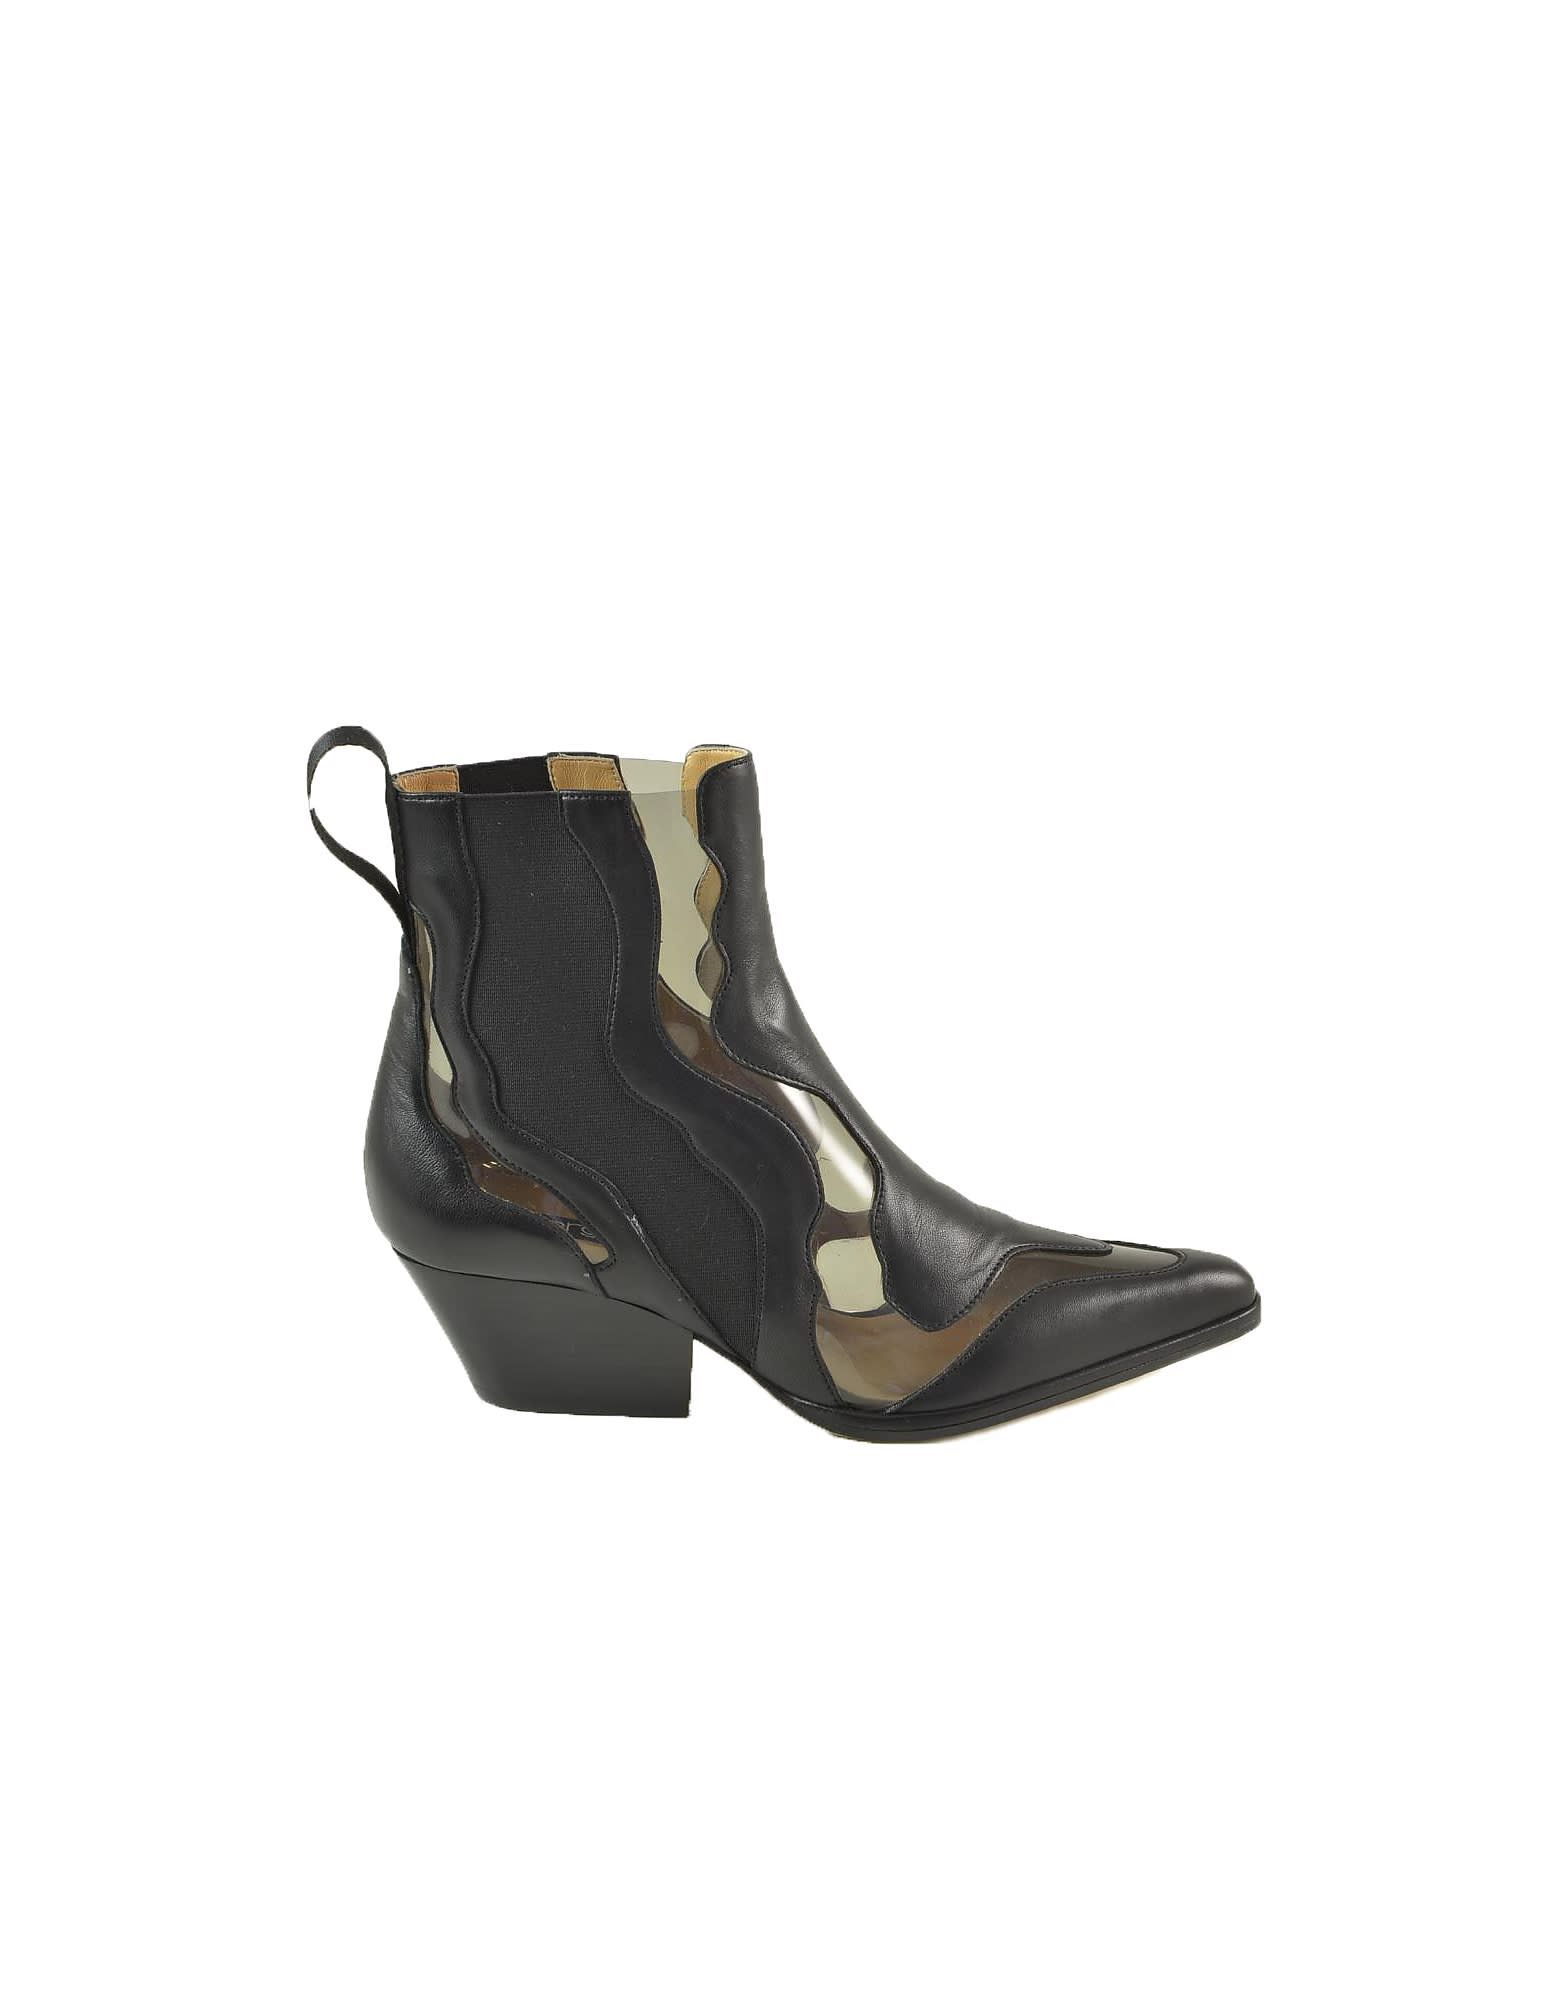 Sergio Rossi Black Leather And Pvc Cow-boy Booties